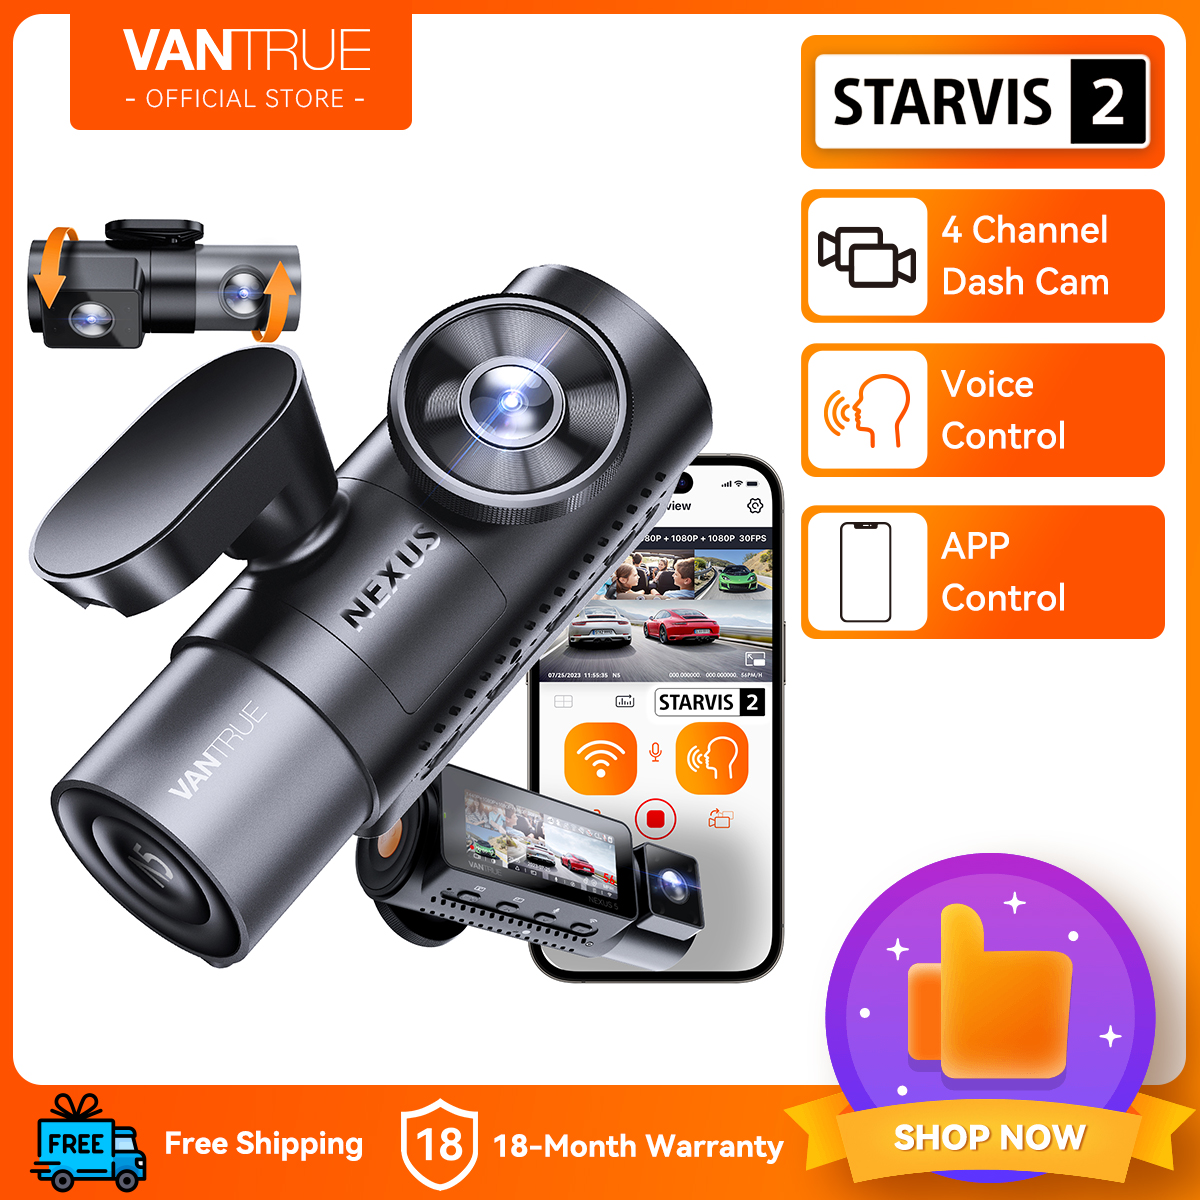 OFFICIAL]Vantrue N5 4 Channel WiFi Dash Cam with STARVIS 2 IR Night Vision,  Front 2.7K+Front Cabin 1080P+Rear Cabin 1080P+Rear 1080P Dash Camera for Car